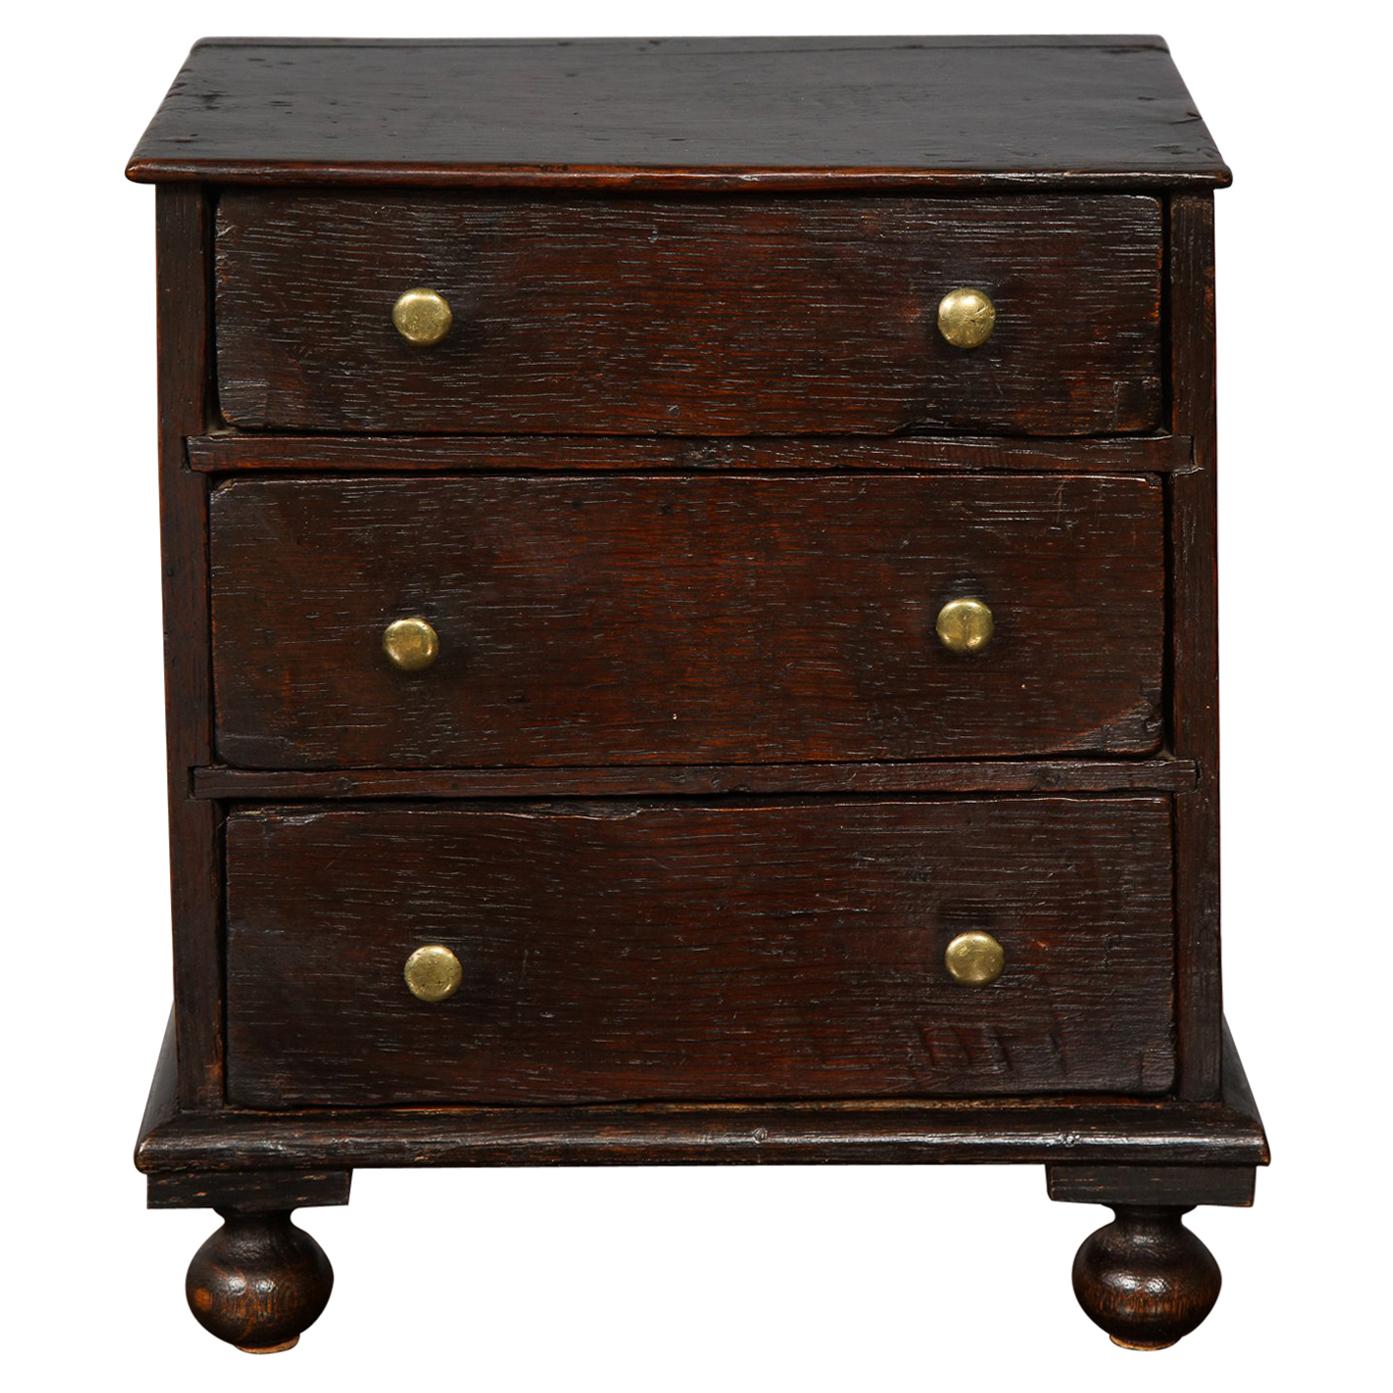 Miniature English or Welsh Oak Chest of Drawers